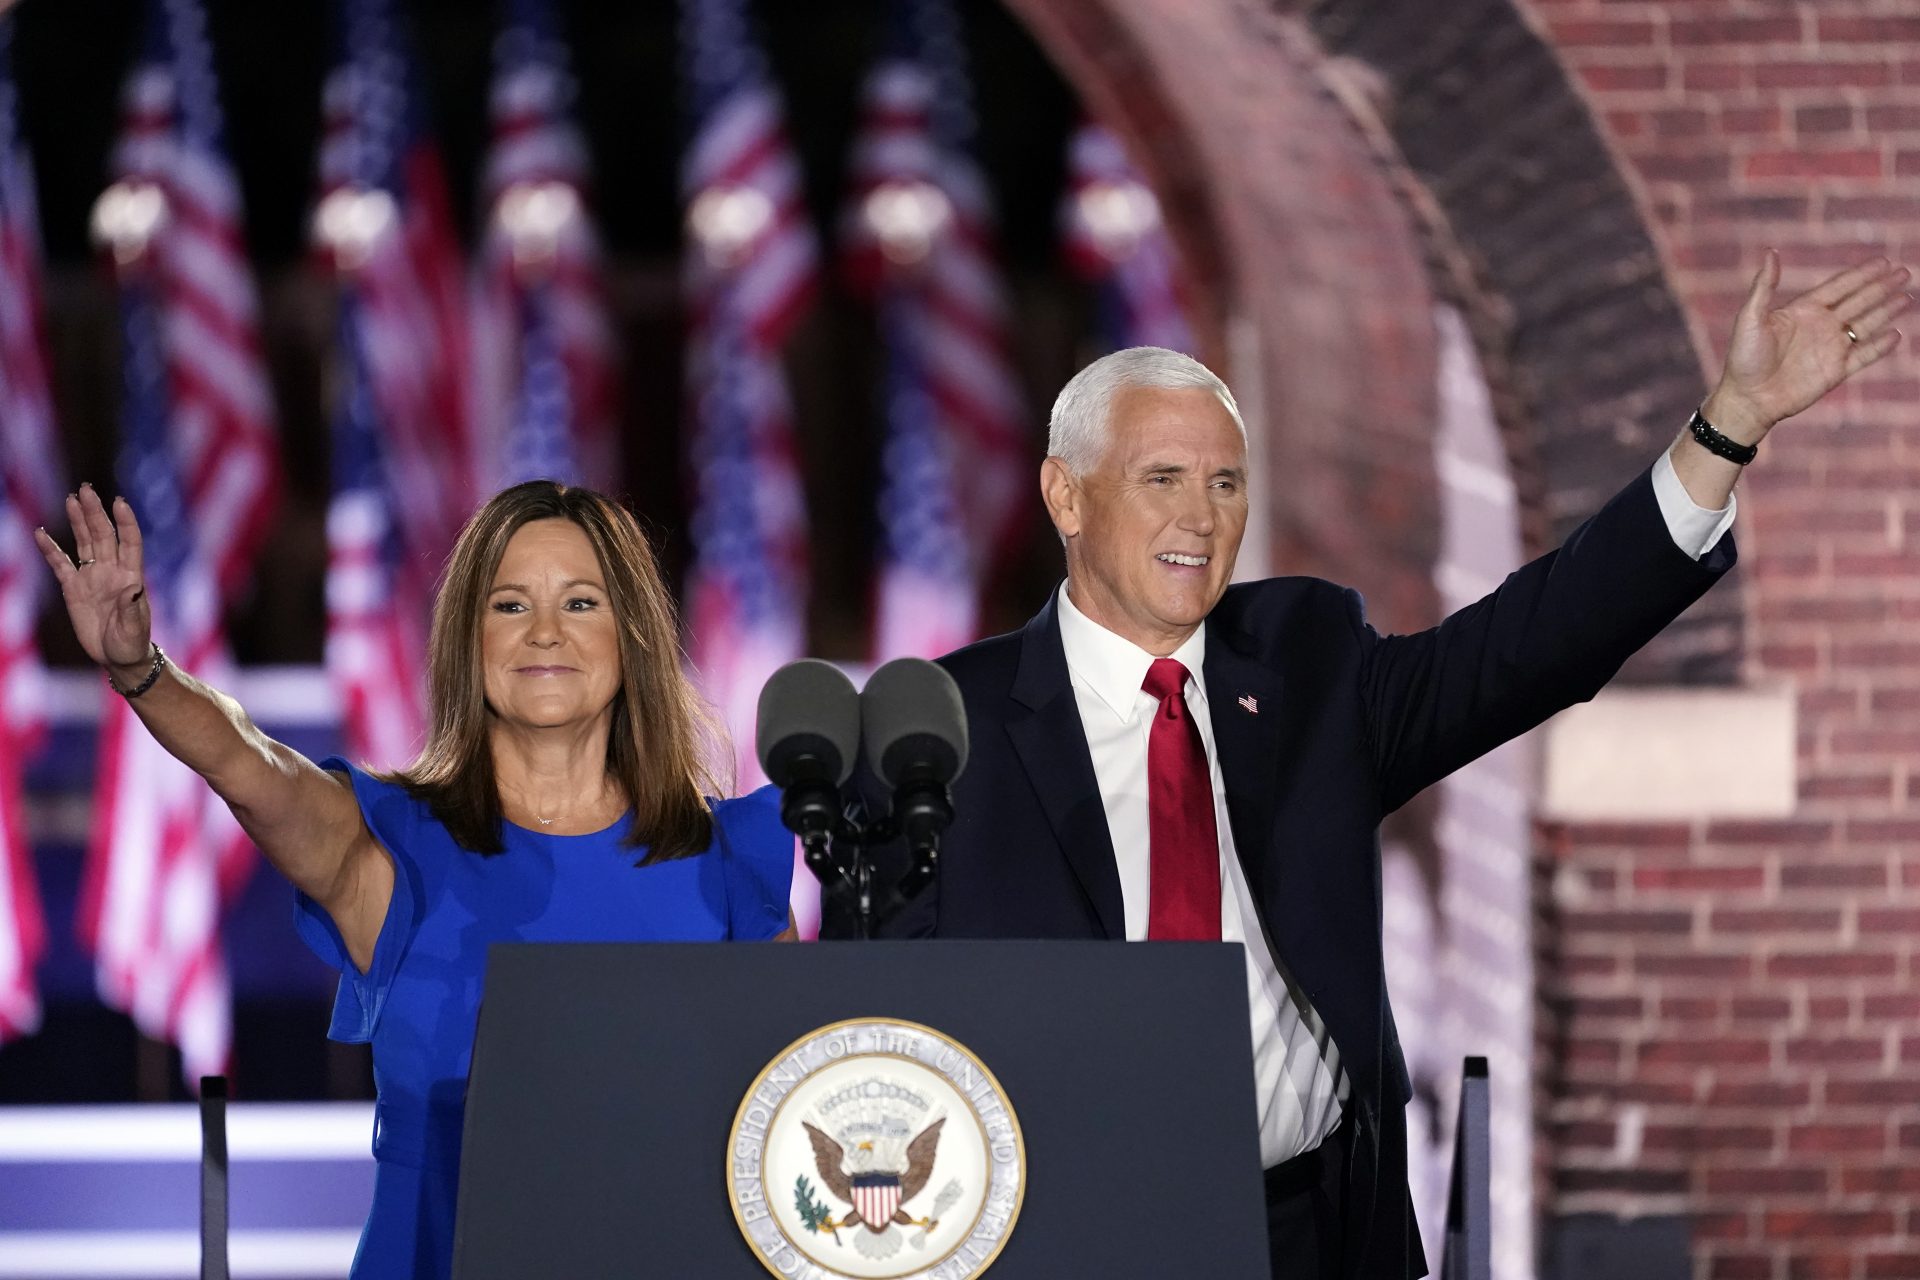 Vice President Mike Pence arrives with his wife Karen Pence to speak on the third day of the Republican National Convention at Fort McHenry National Monument and Historic Shrine in Baltimore, Wednesday, Aug. 26, 2020.